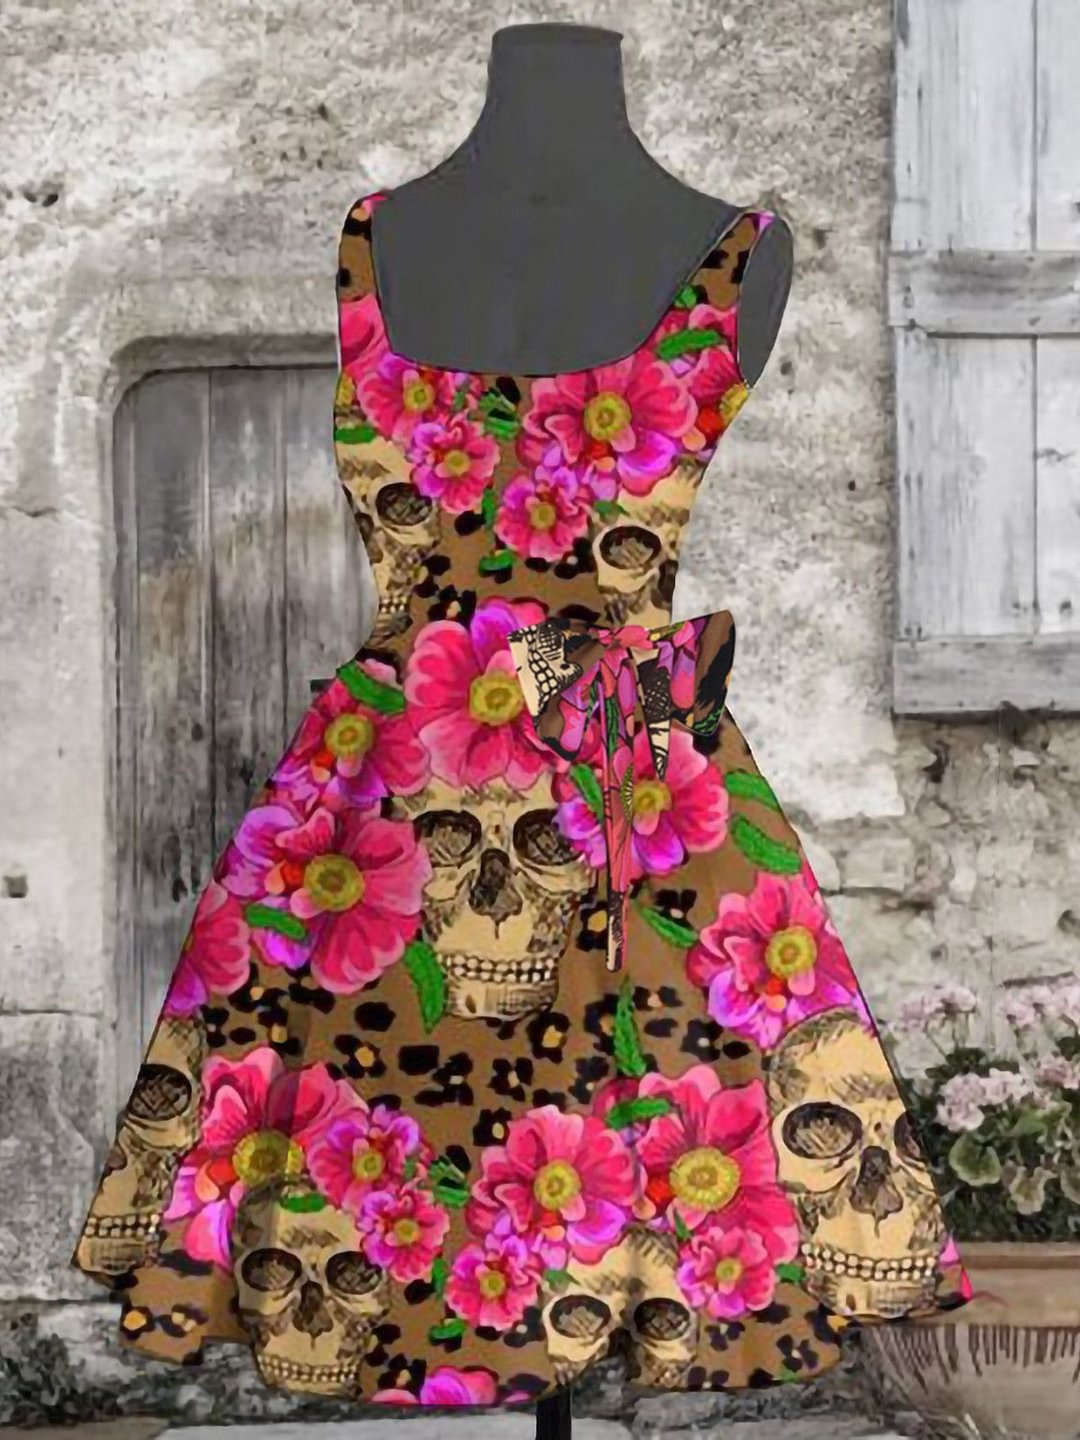 A-line Skull And Floral Printing Halloween Party Cosplay Apron Dress With Bow-knot